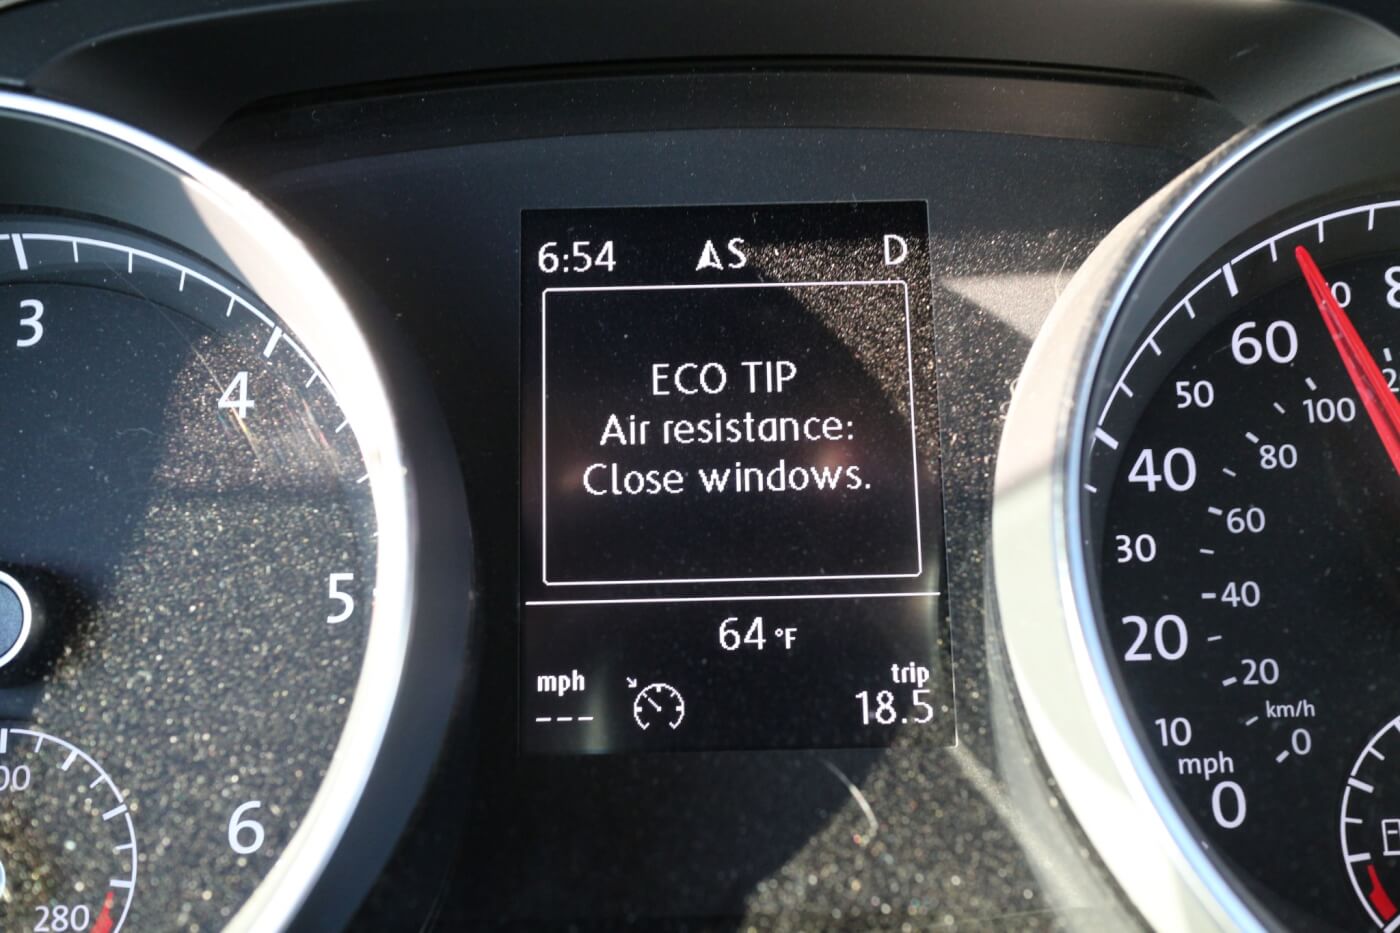 The driver assist info system offers eco tips as you push along. Besides recommending up and down shifts points, it also warns that open windows eat fuel. This warning about windows is found on both the automatic and manual cars. 